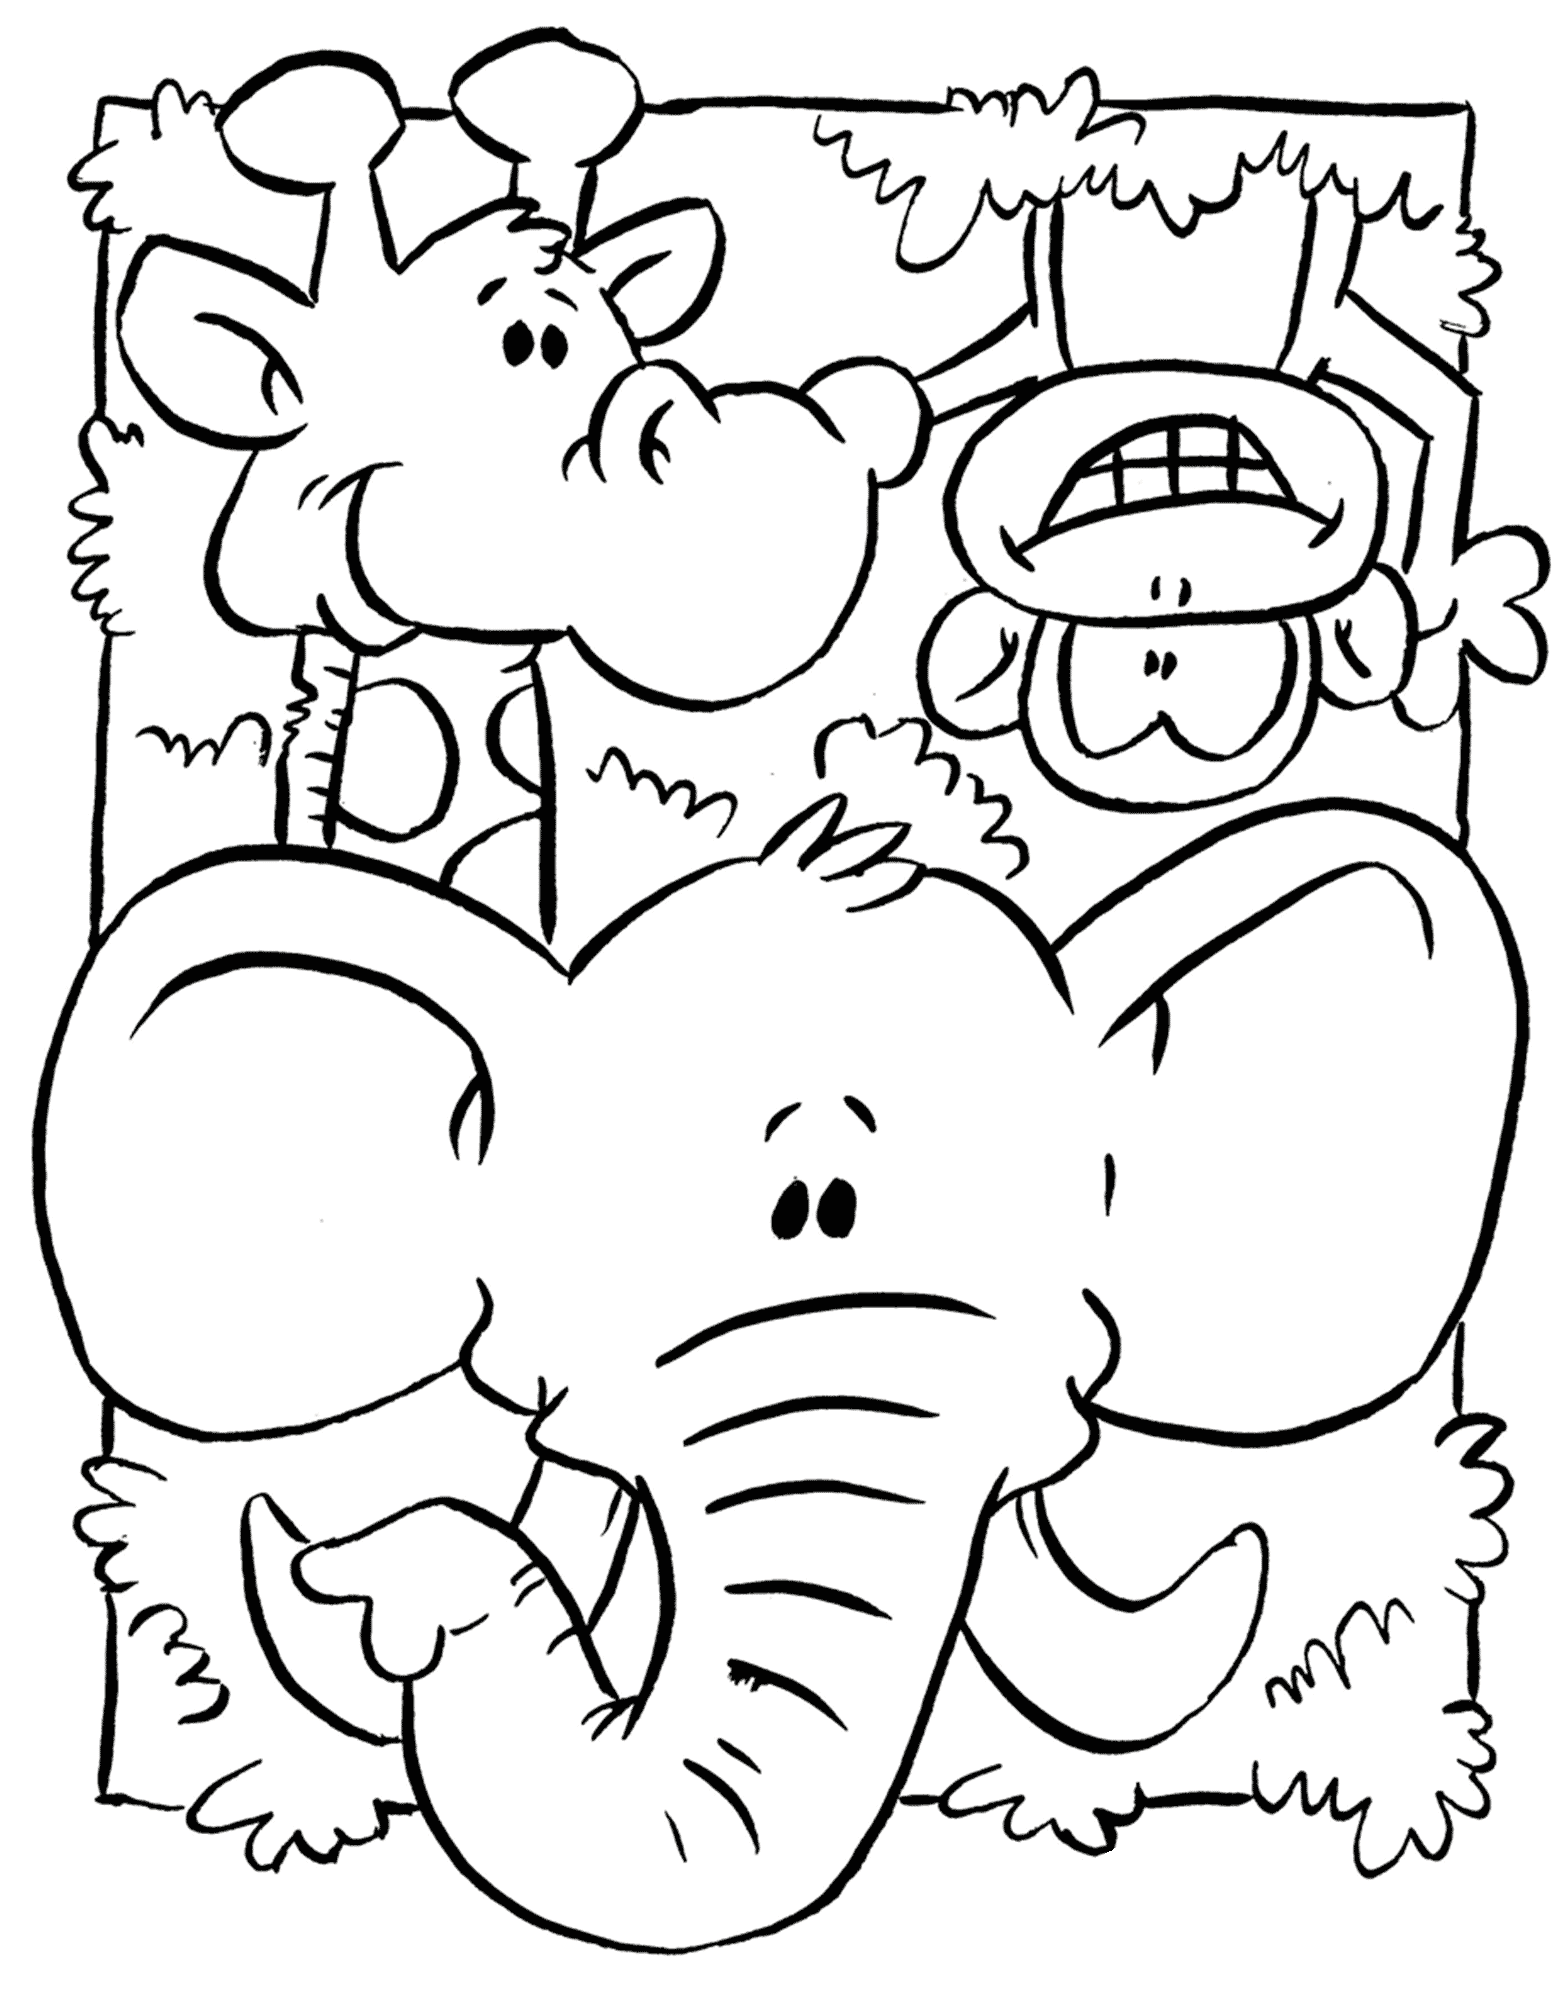 Download Wild Animal Coloring Pages - Best Coloring Pages For Kids